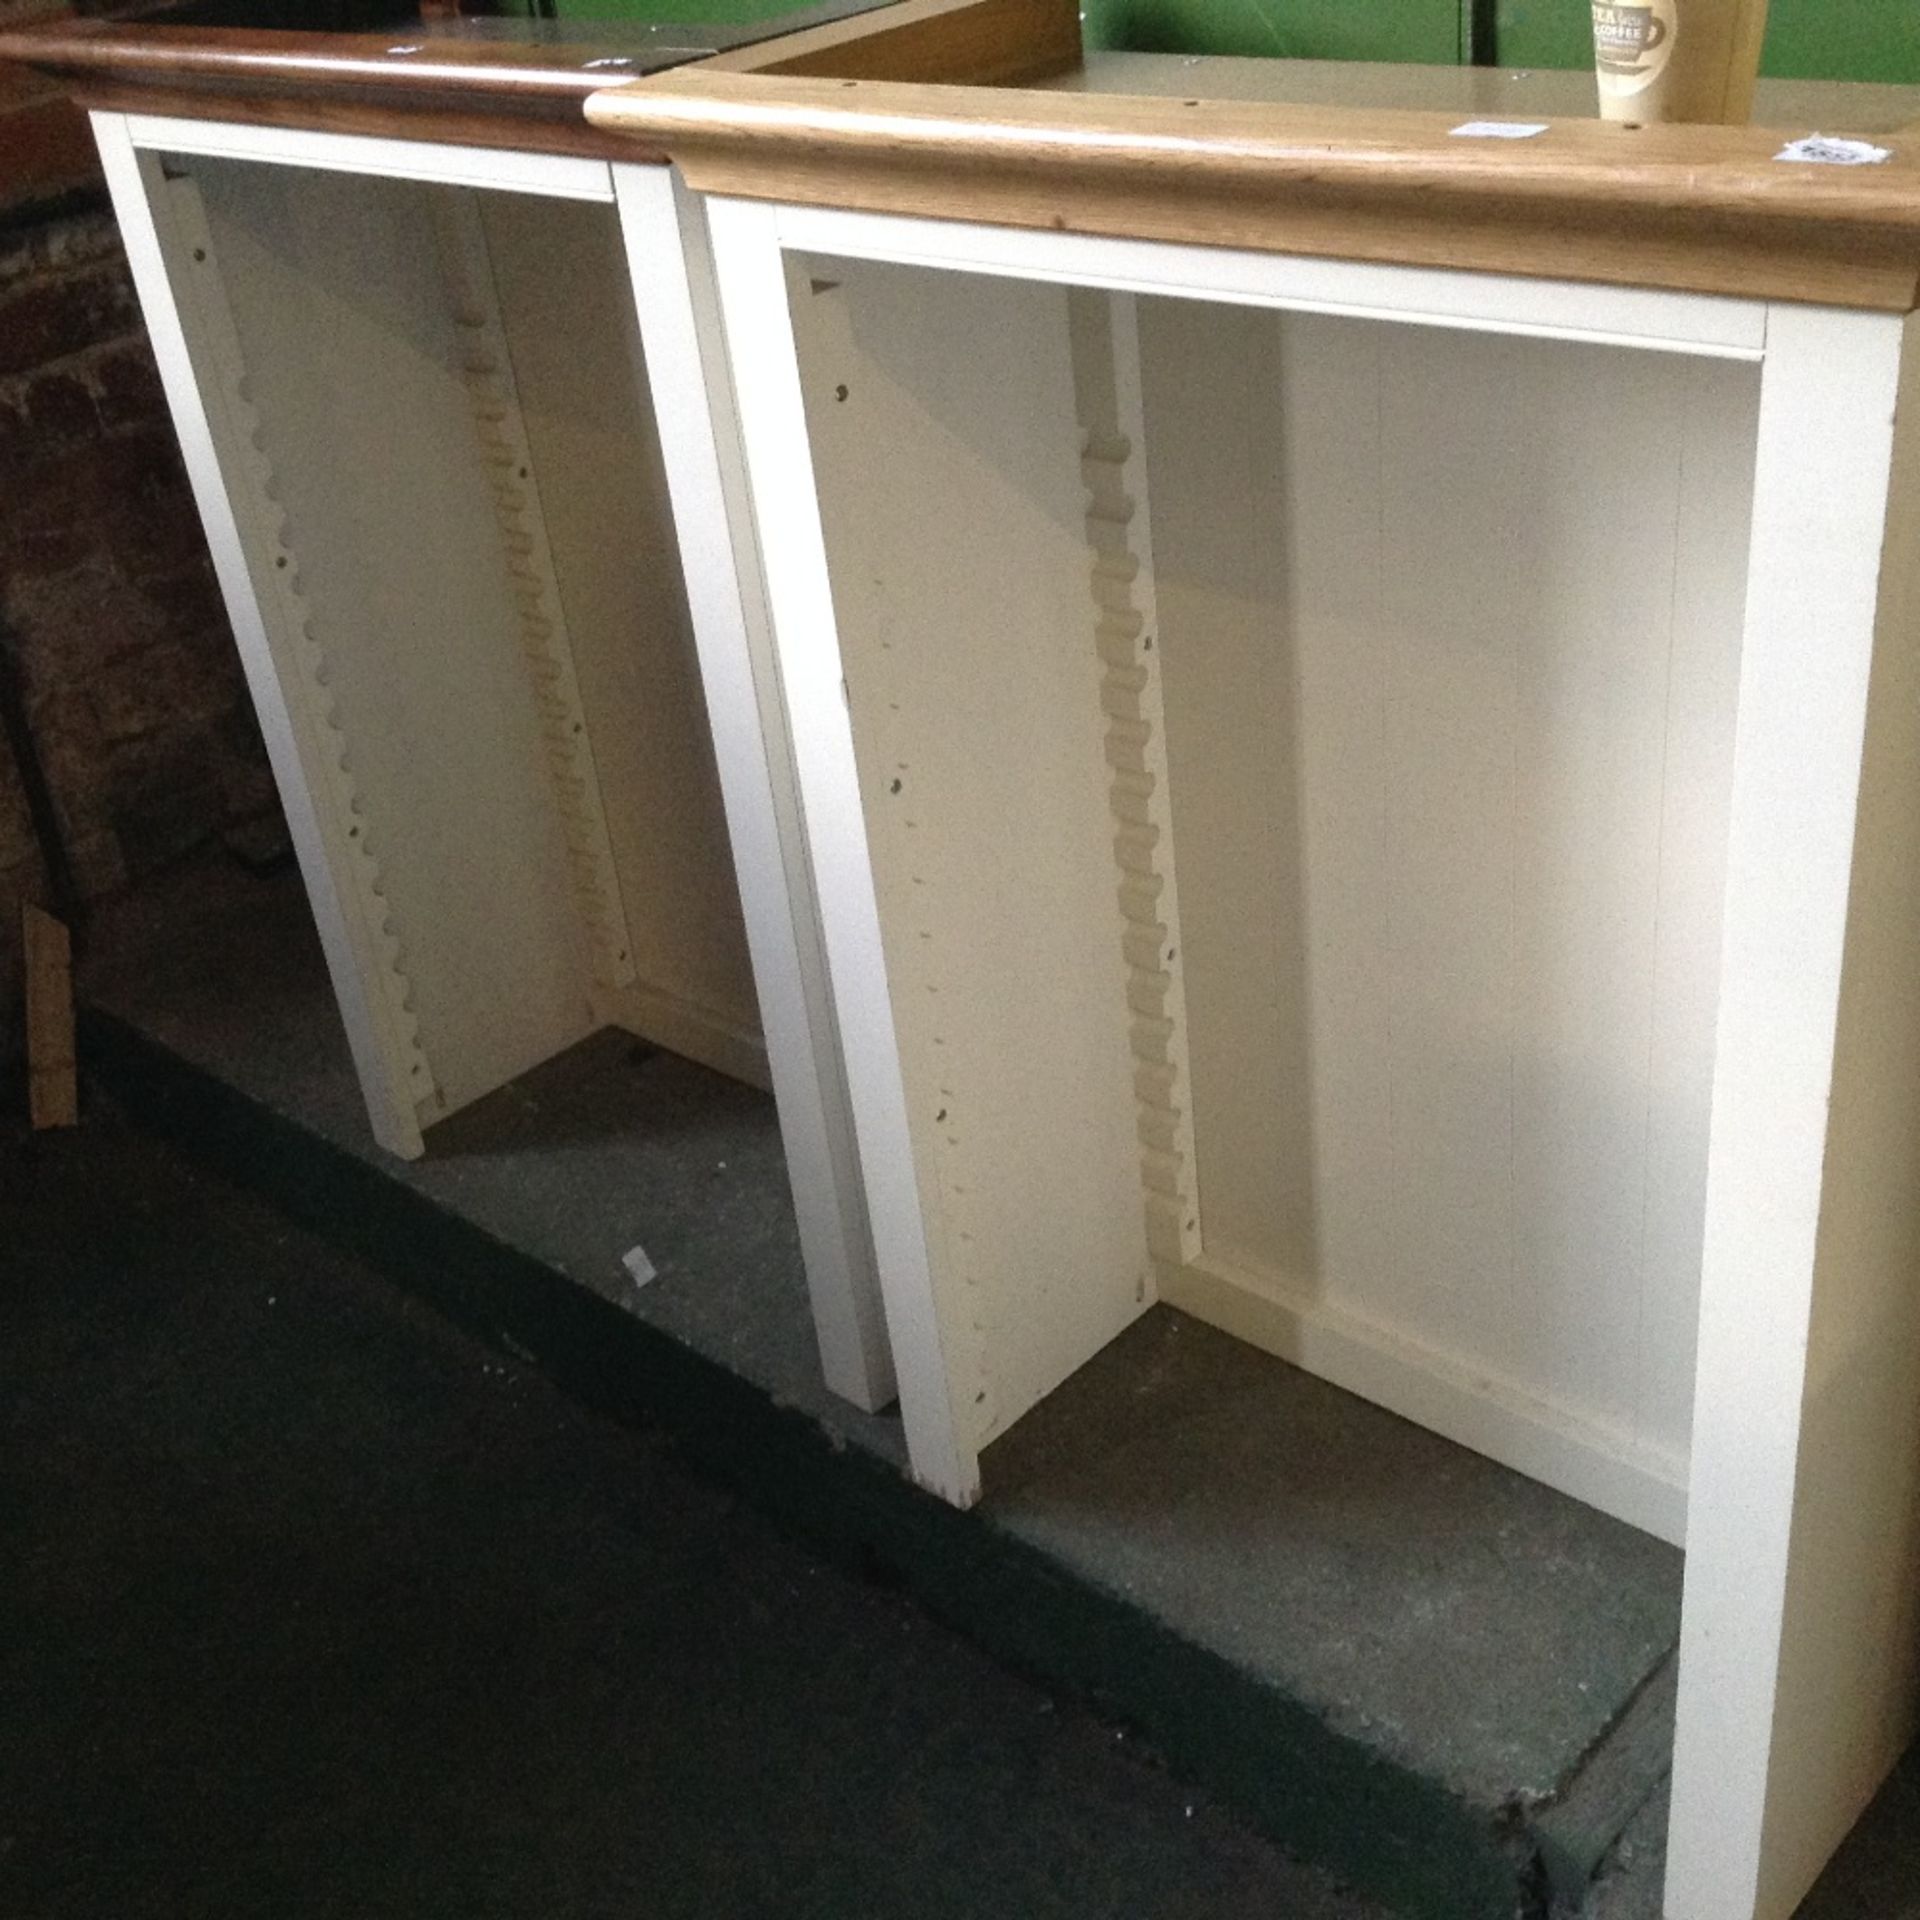 2X BOOKCASE TOPS (missing shelves) - Image 2 of 2